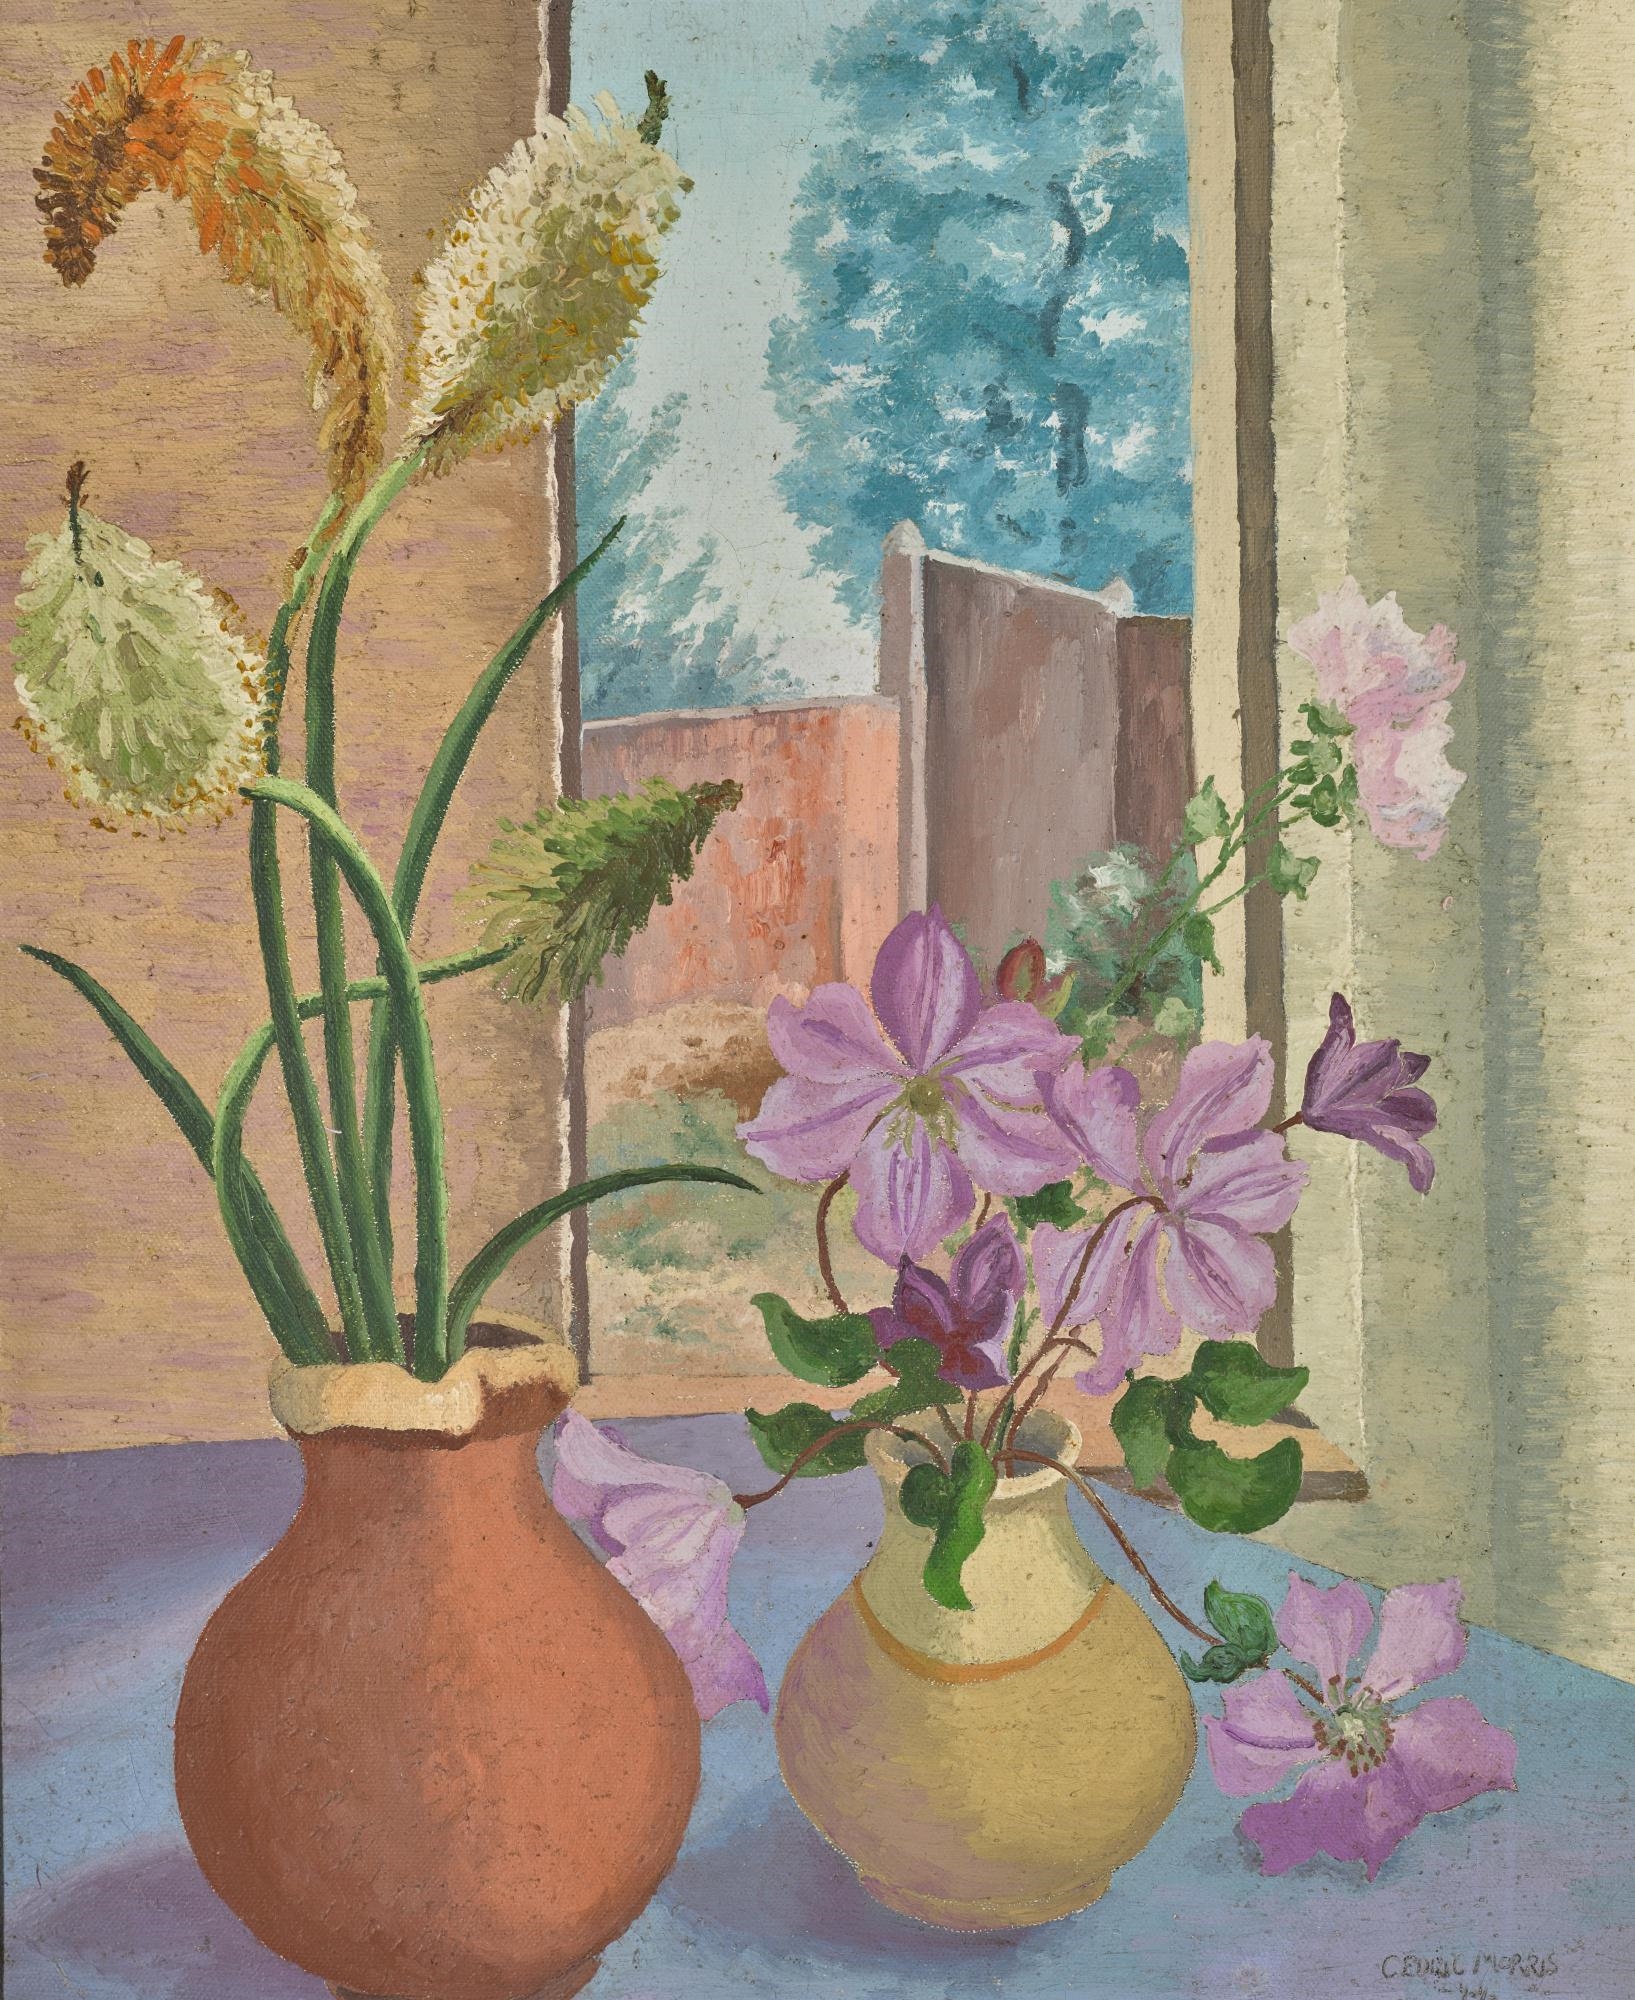 STILL LIFE (CLEMATIS, KNIPHOFIA AND HOLLYHOCK) by Sir Cedric Morris, dated 44